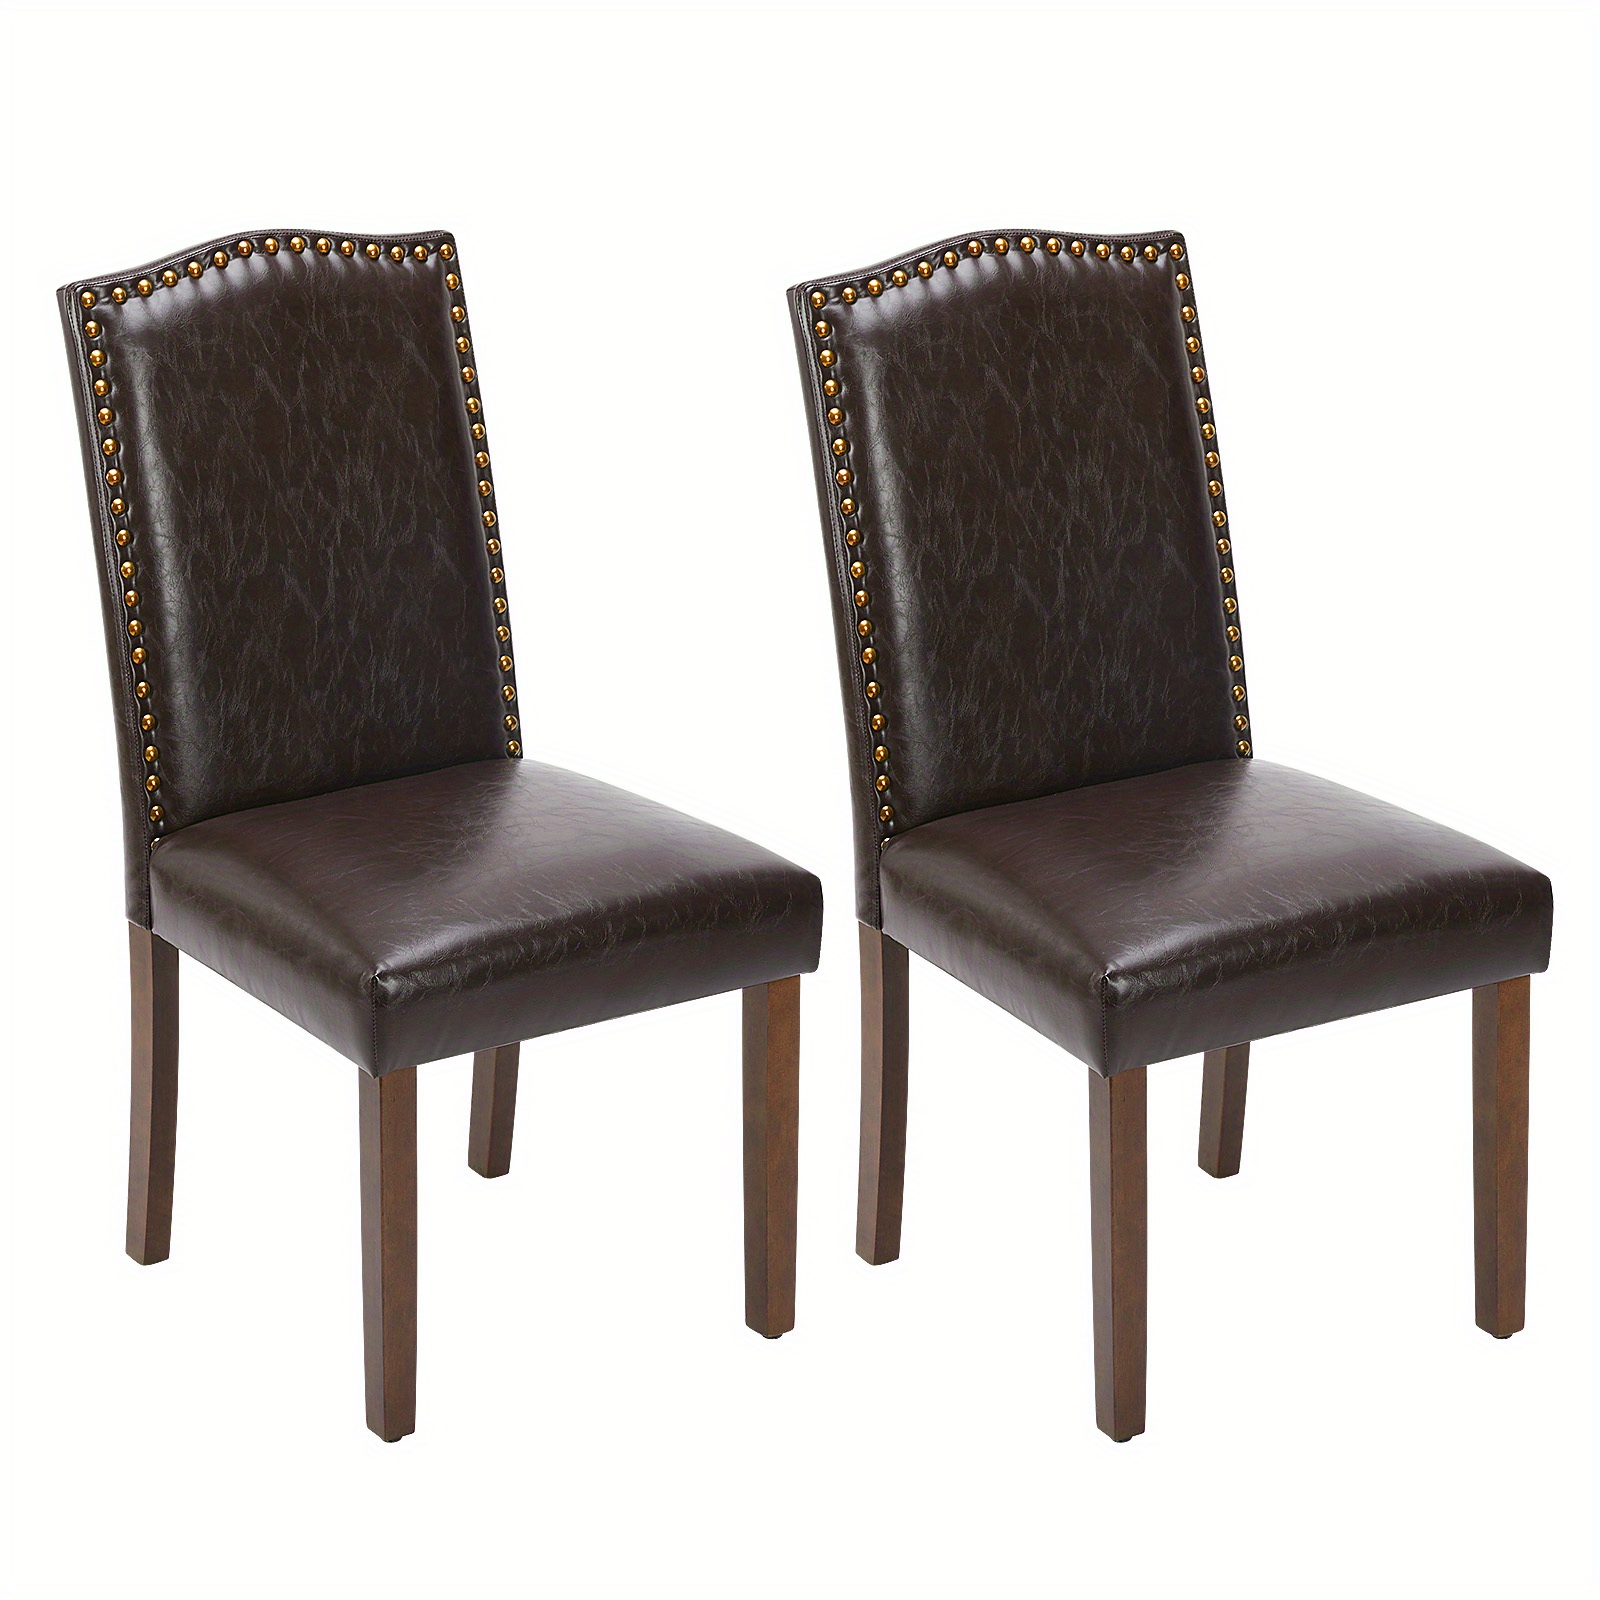 

Modern Upholstered Leather Dining Room Chair, Dining Chairs With Wood Legs And Nailhead Trim, Mid-century Accent Dinner Chair For Kitchen, Living Room